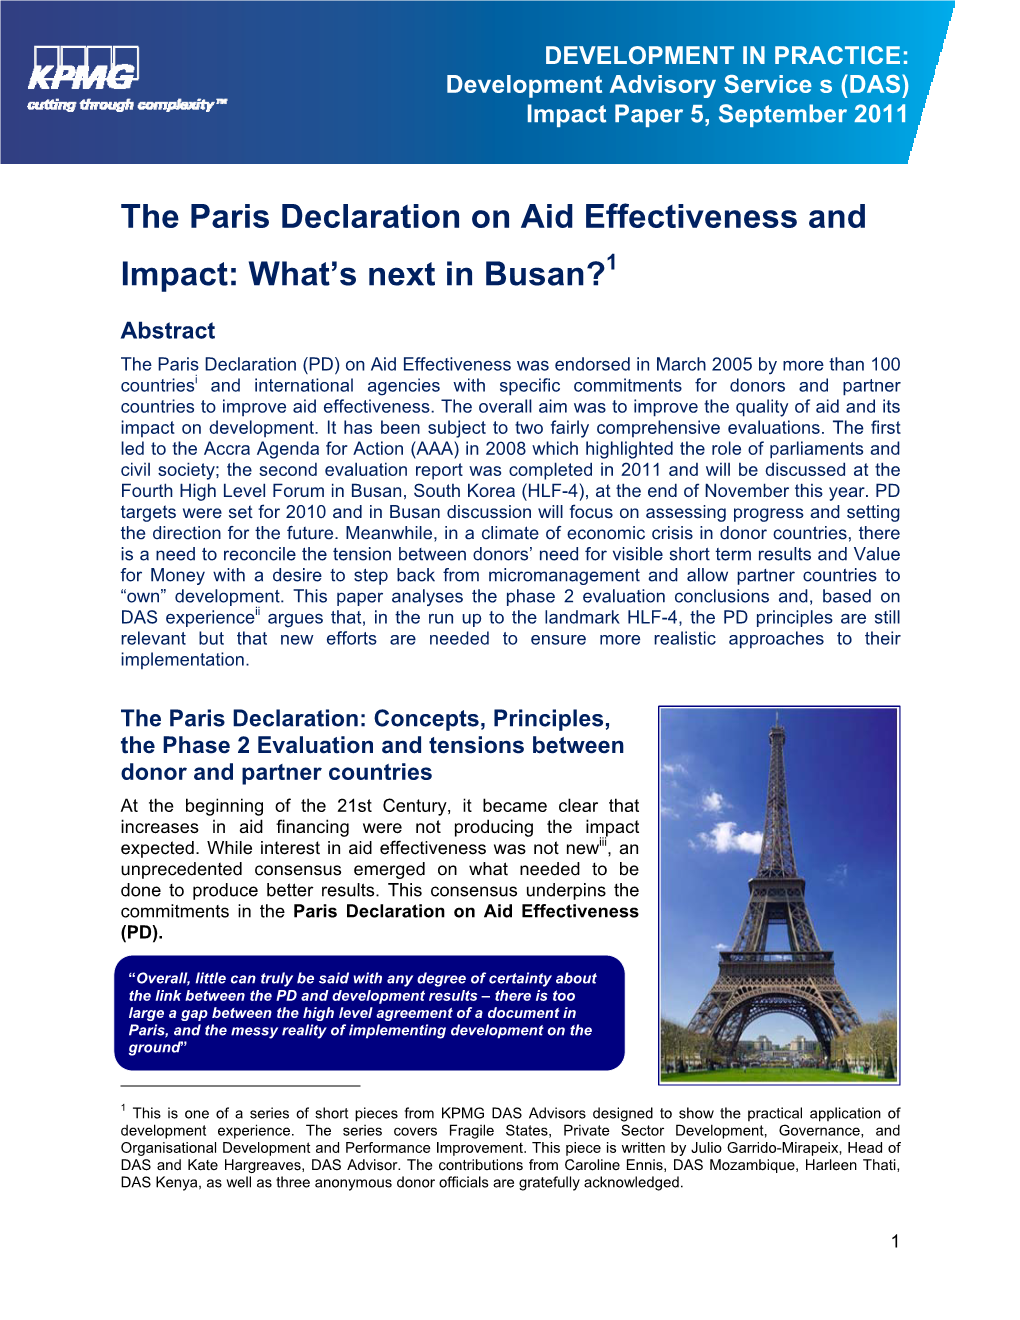 The Paris Declaration on Aid Effectiveness and Impact: What’S Next in Busan?1